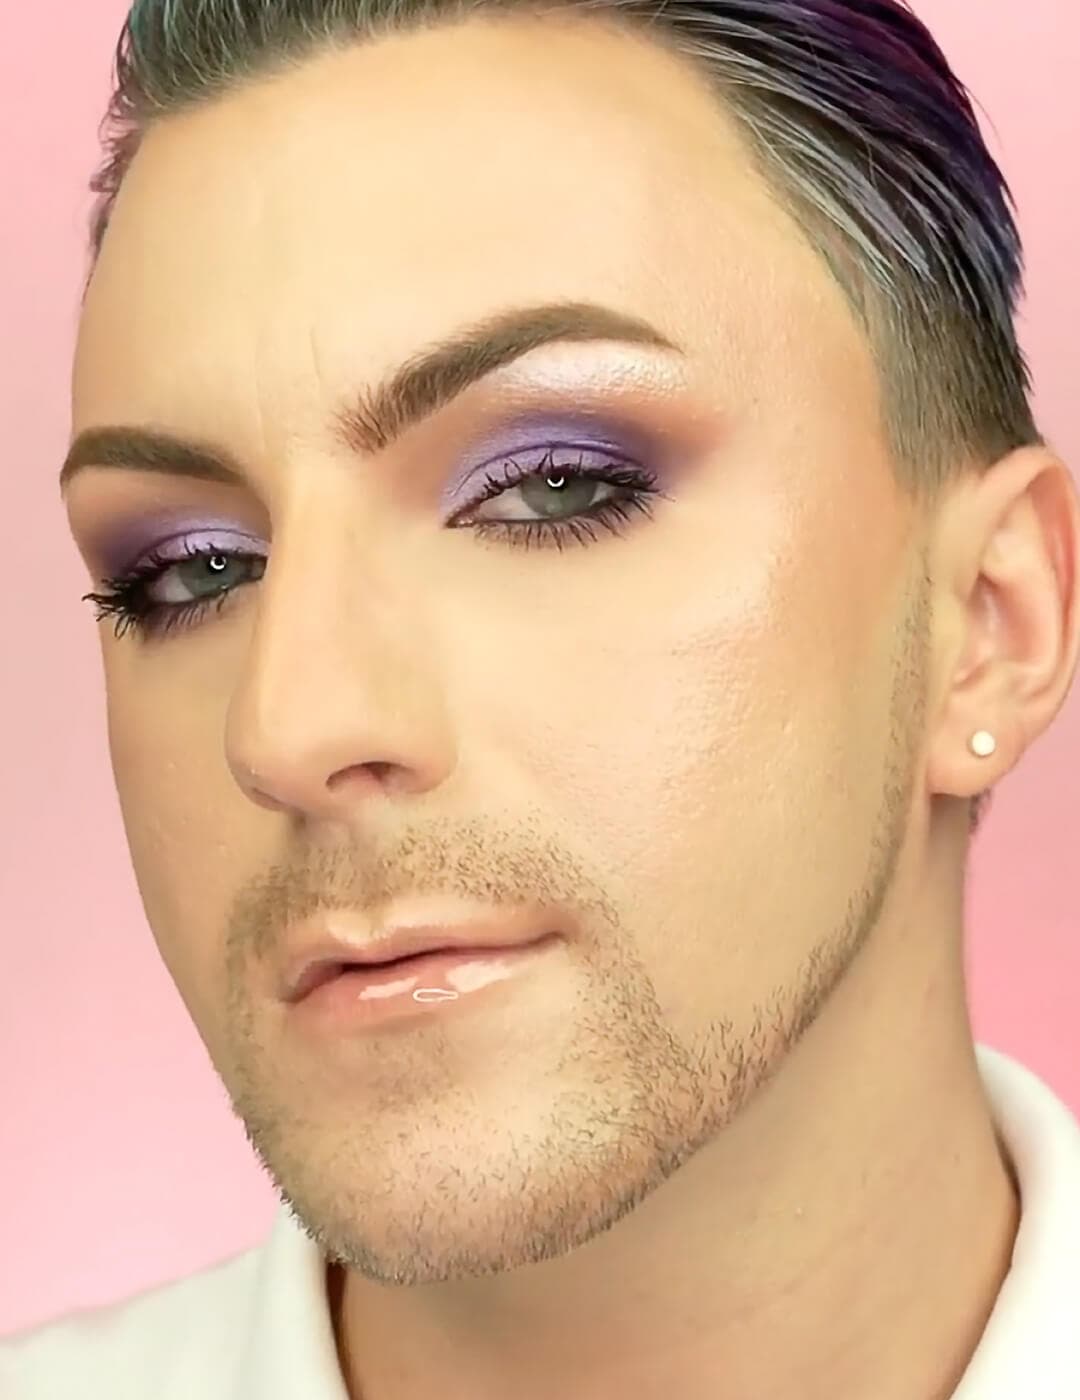 Christopher J rocking a purple eyeshadow makeup look and glossy nude lips